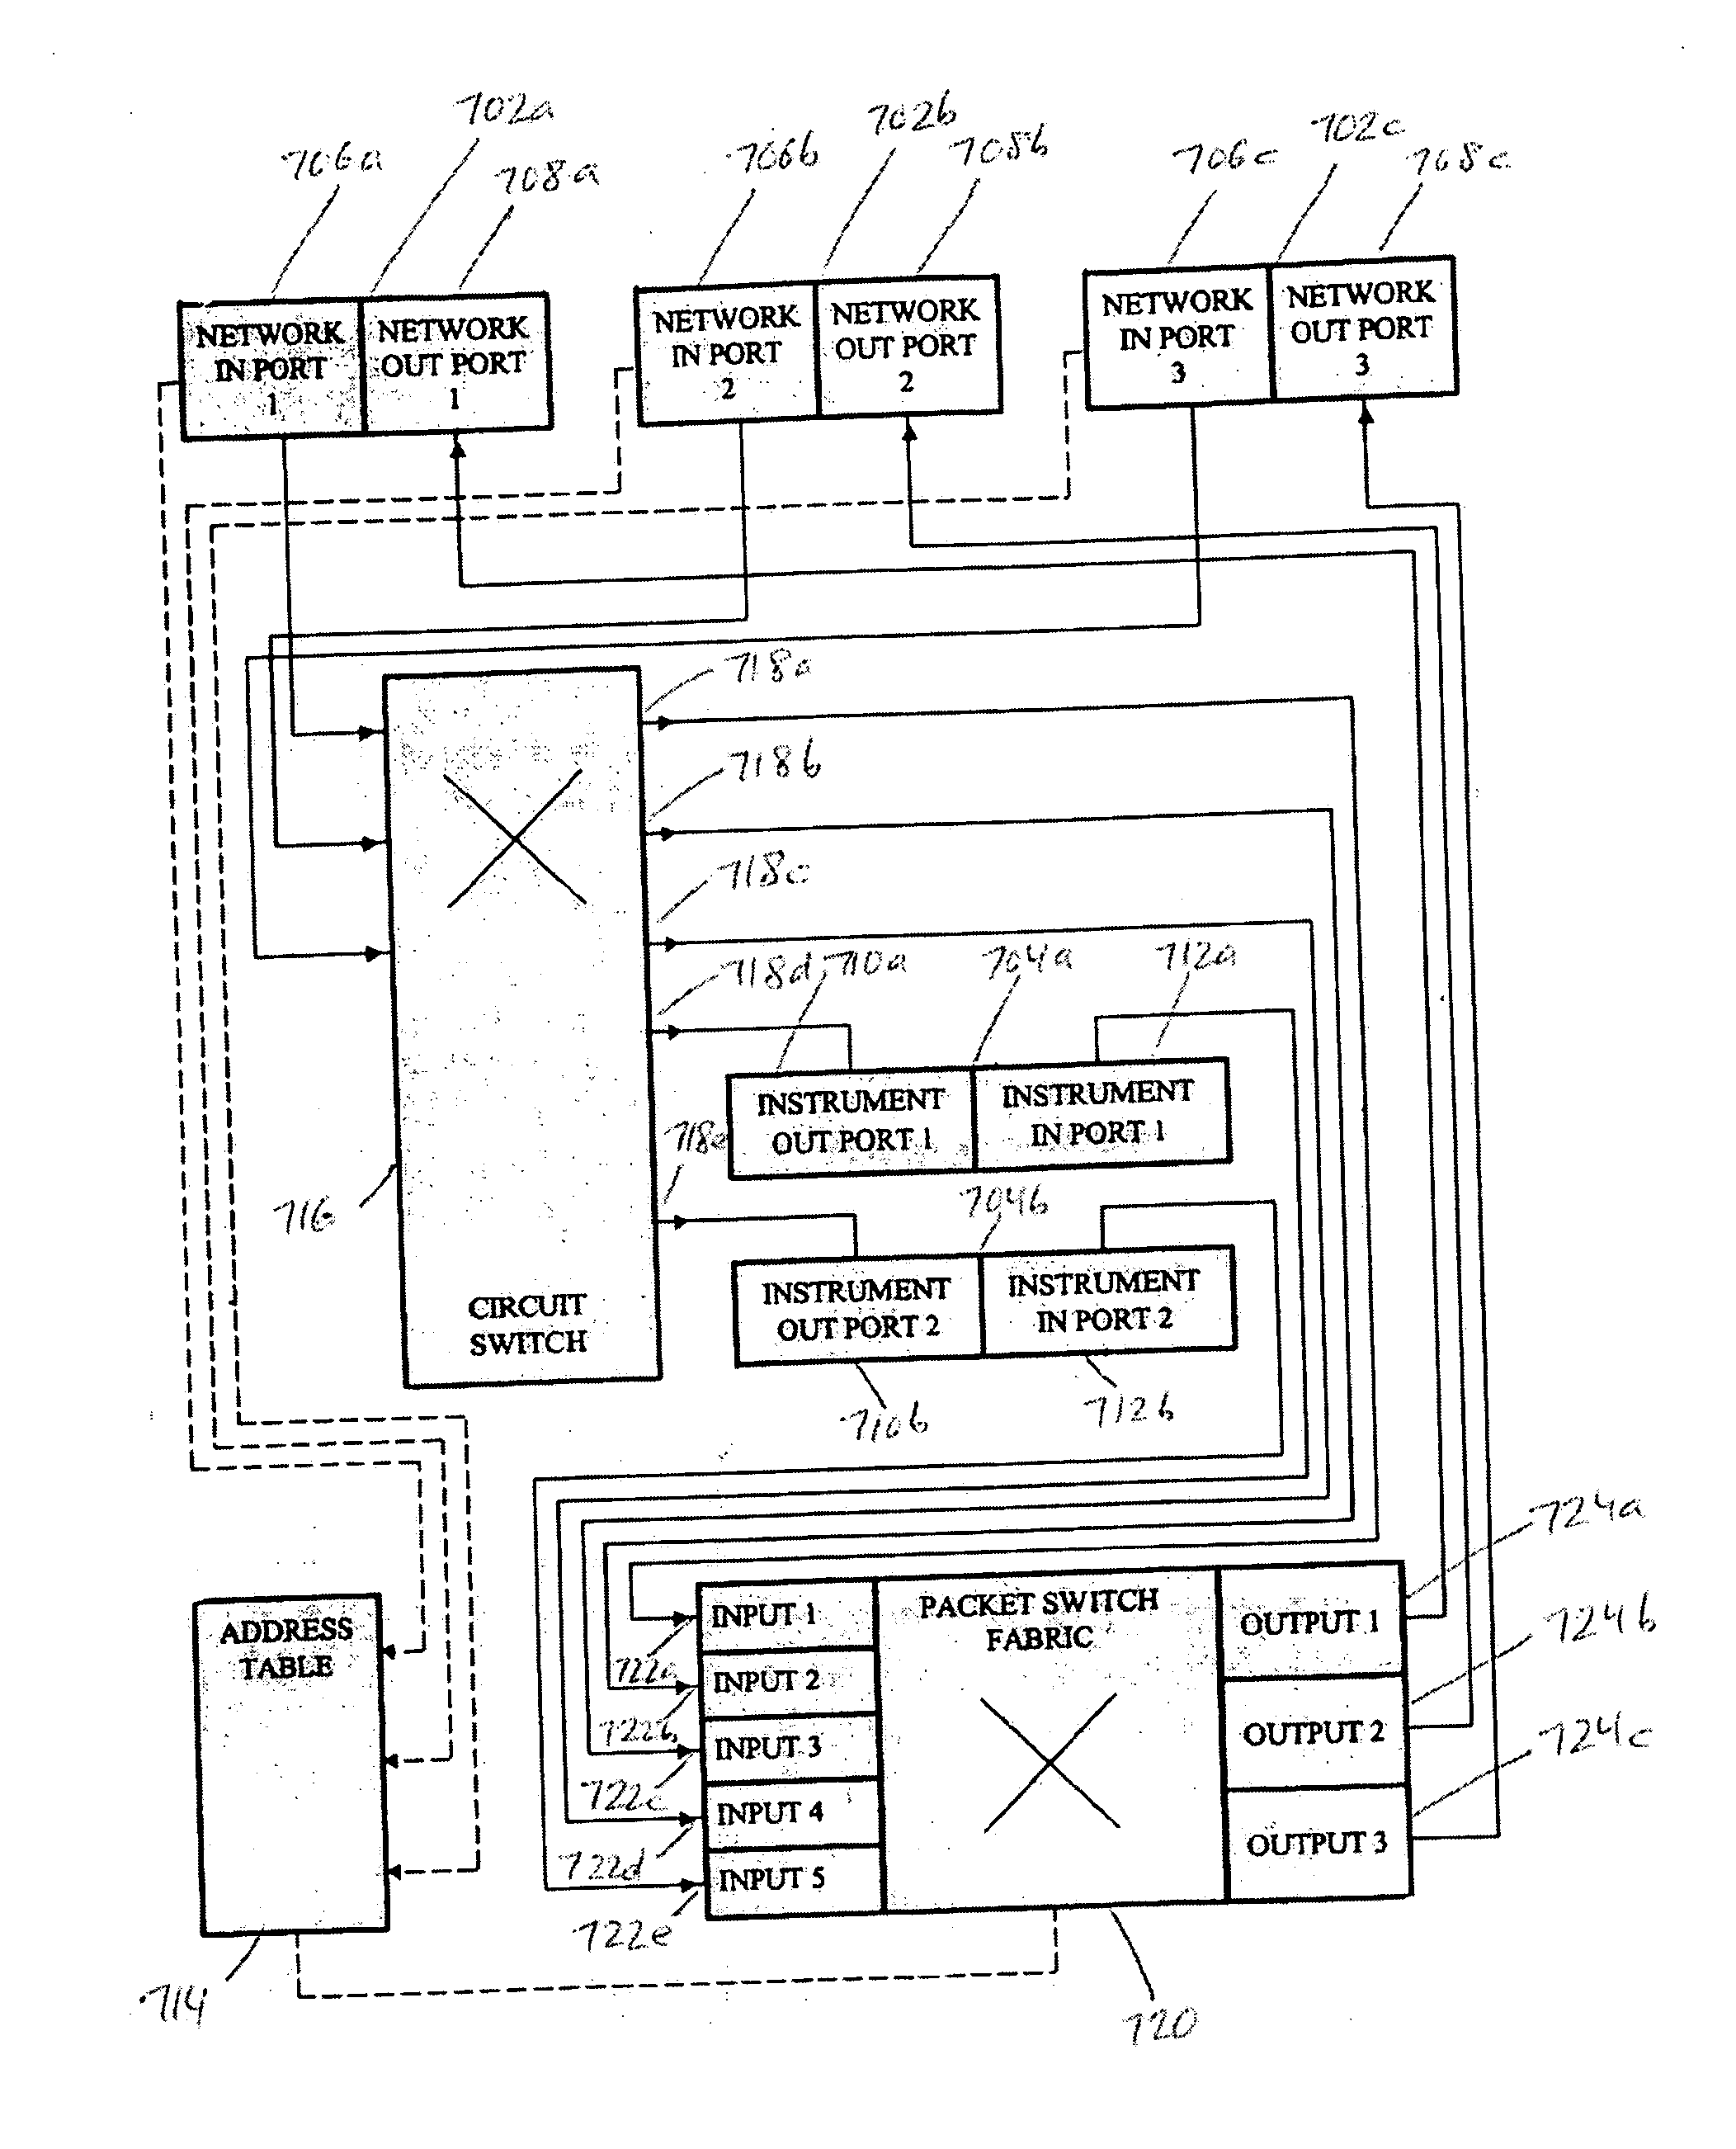 Asymmetric packets switch and a method of use